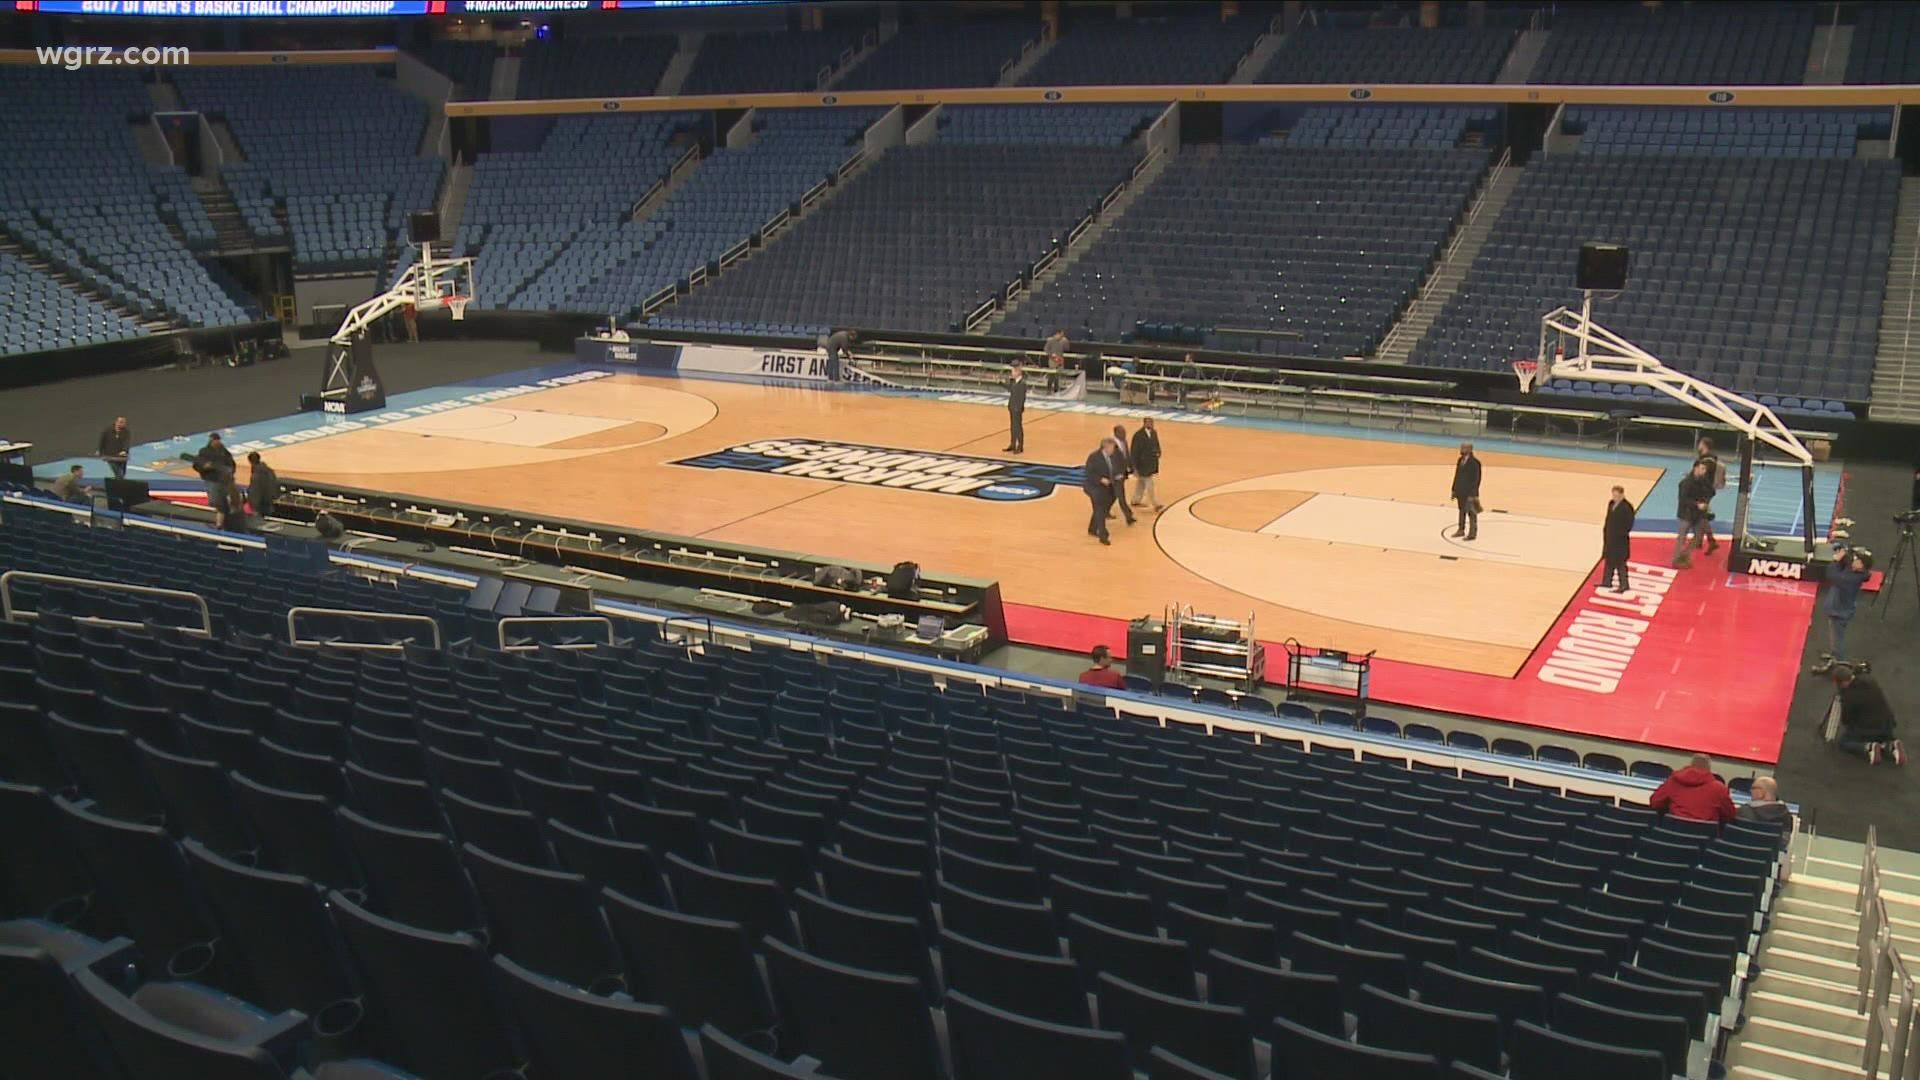 Preparing for a return to March Madness wgrz